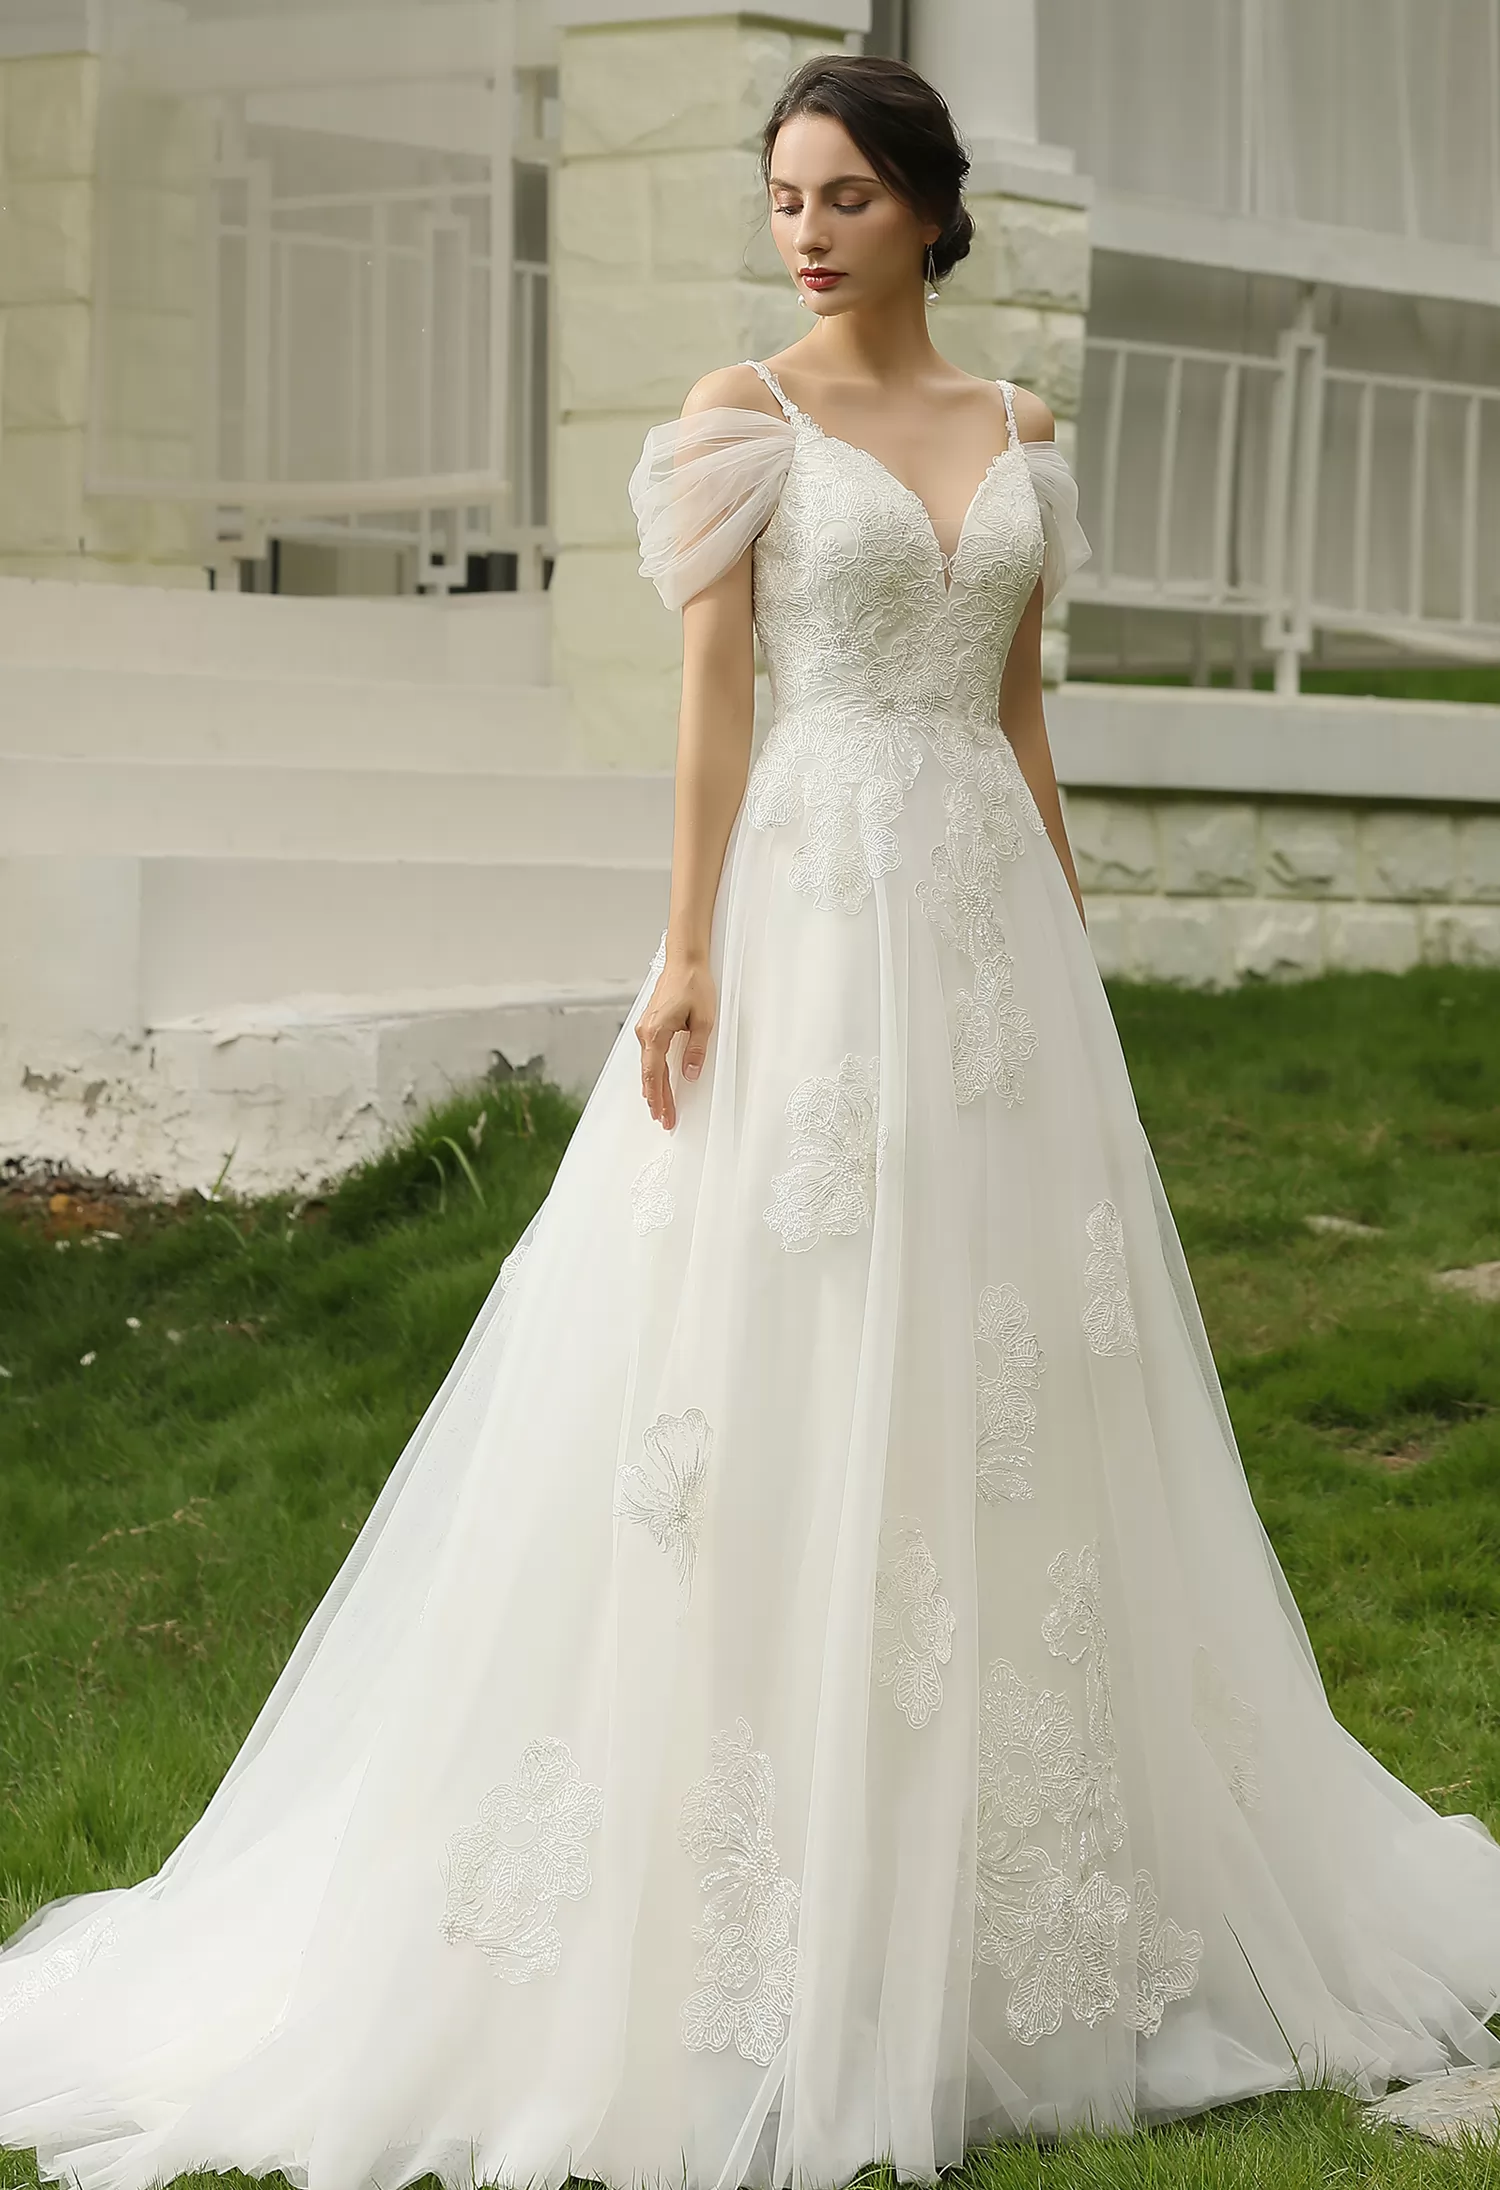 Romantic Glittery  Lace Bridal Gown With Cap Sleeve